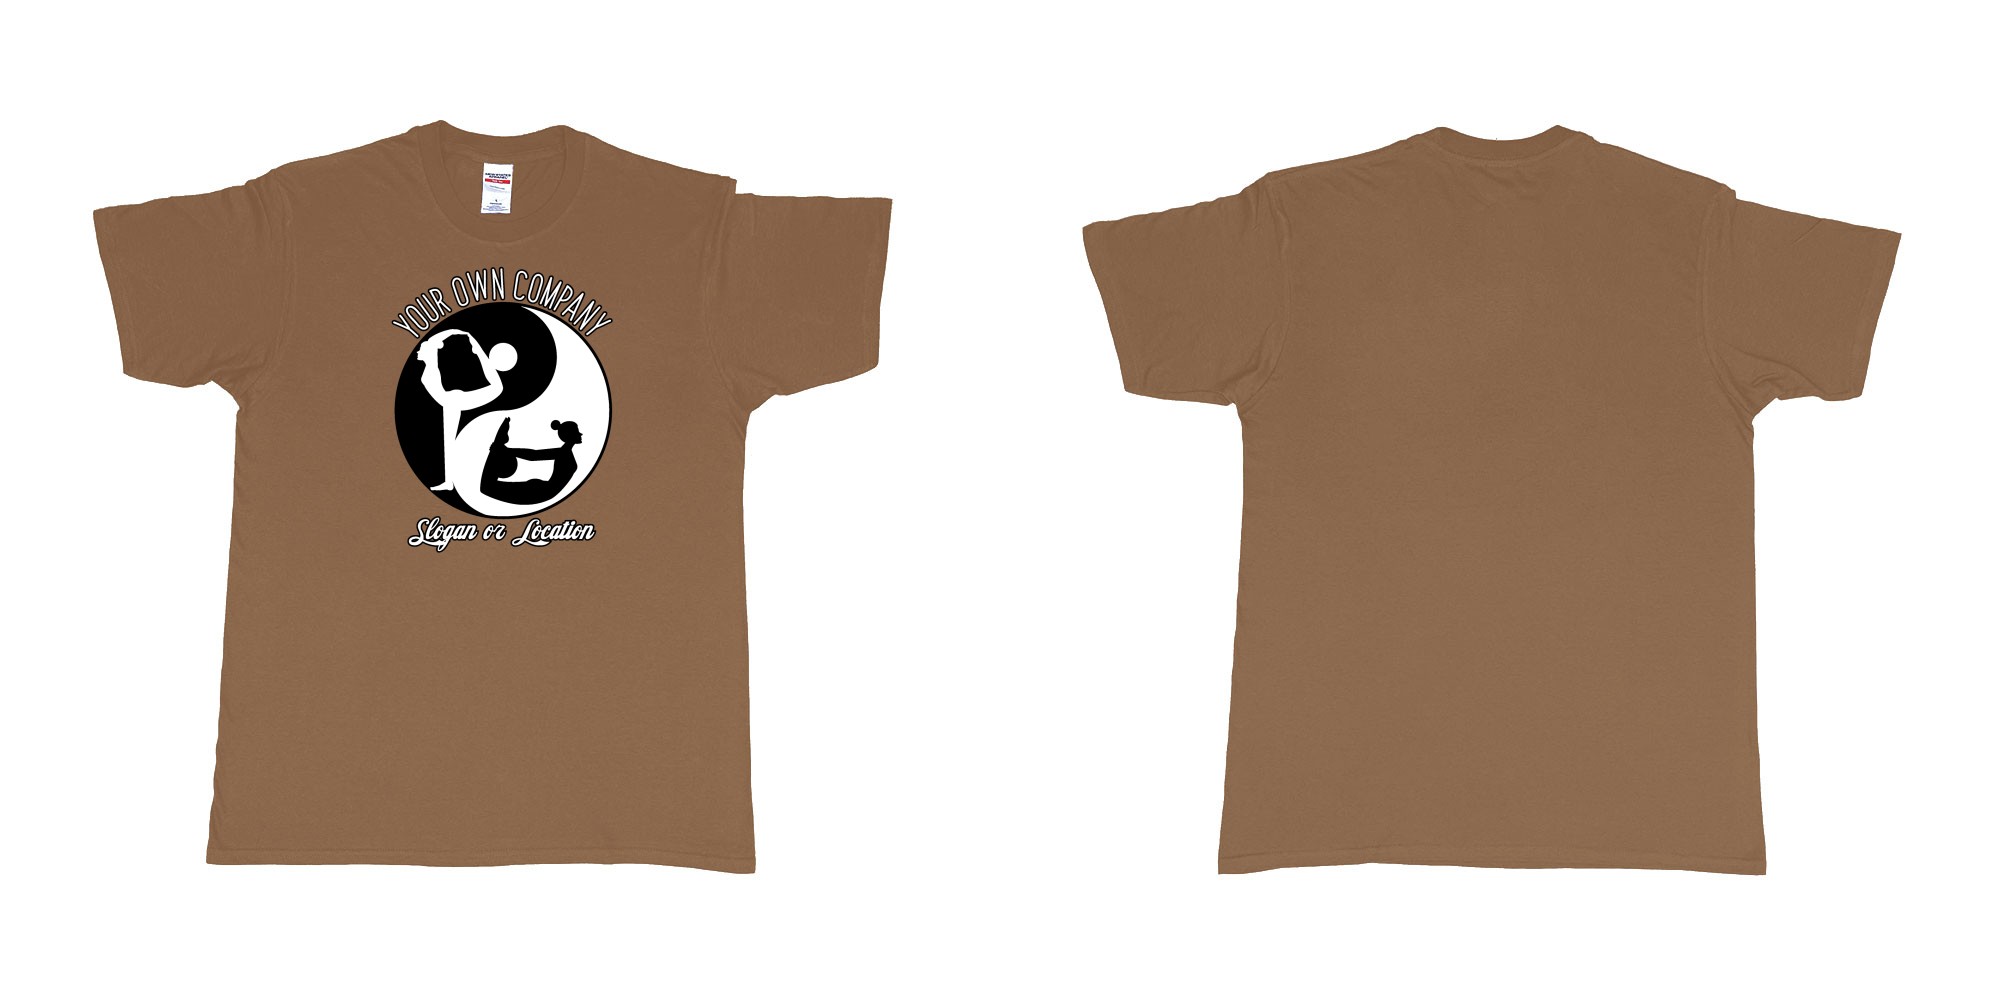 Custom tshirt design yin yang yoga balance custom studio t shirt in fabric color chestnut choice your own text made in Bali by The Pirate Way